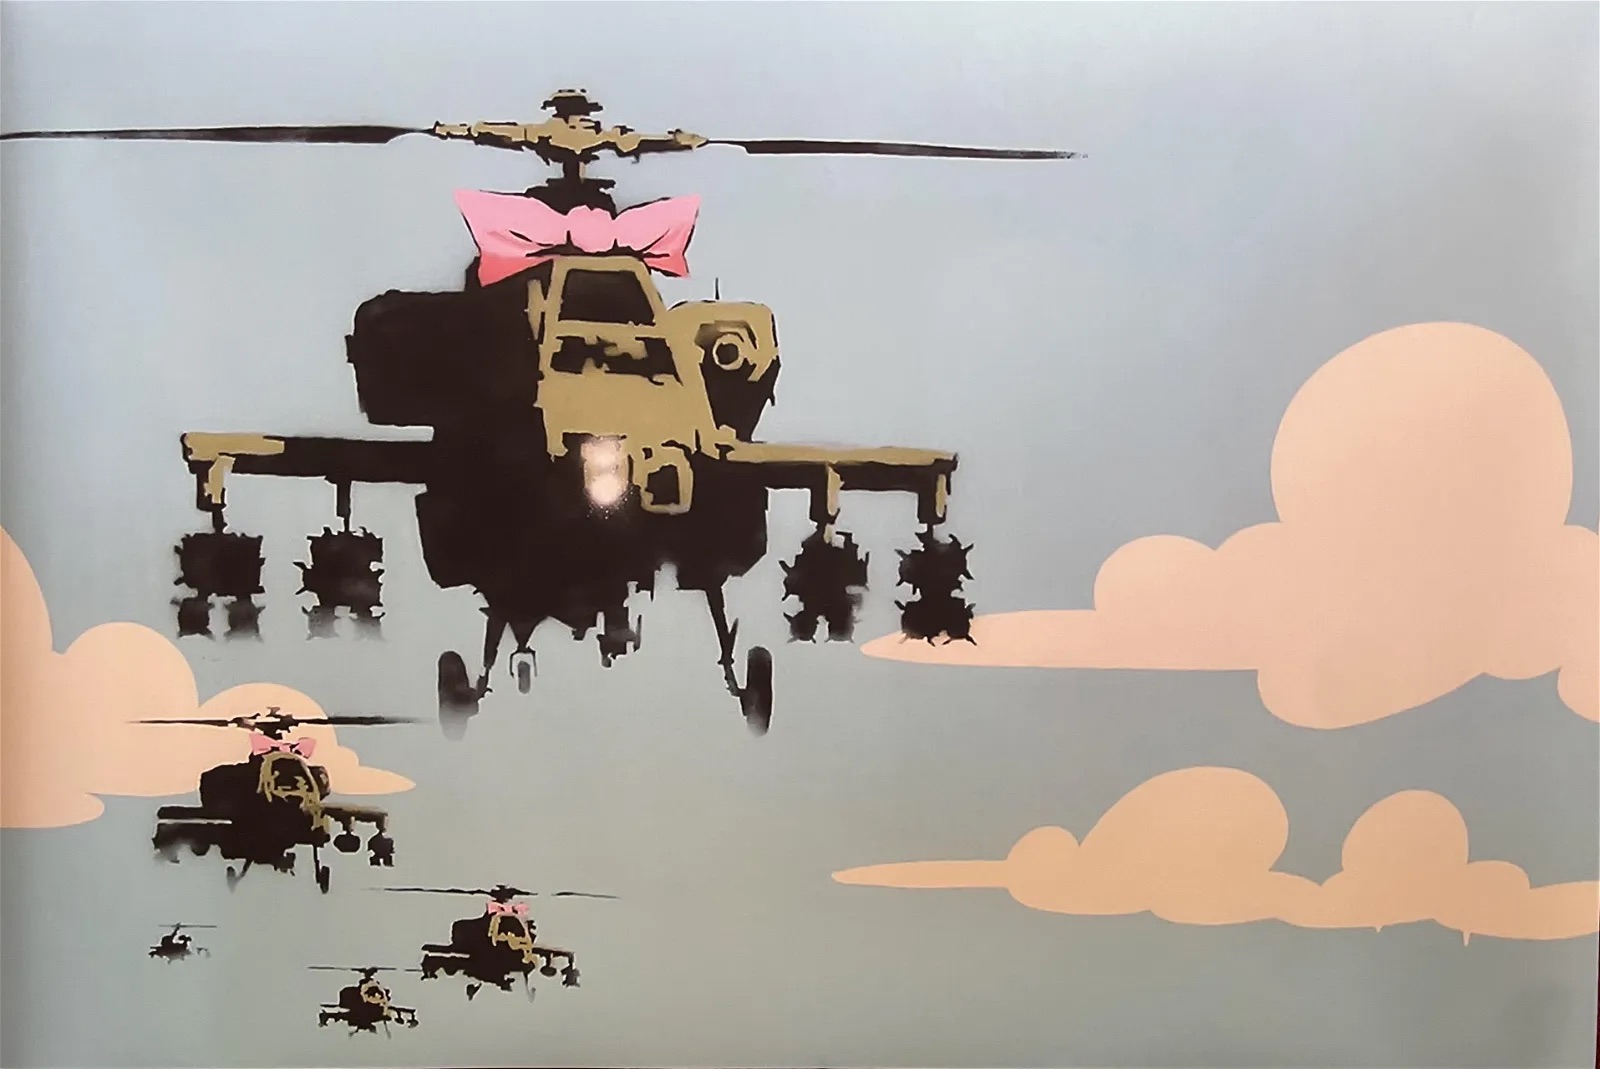 Banksy "Helicopter" Offset Lithograph